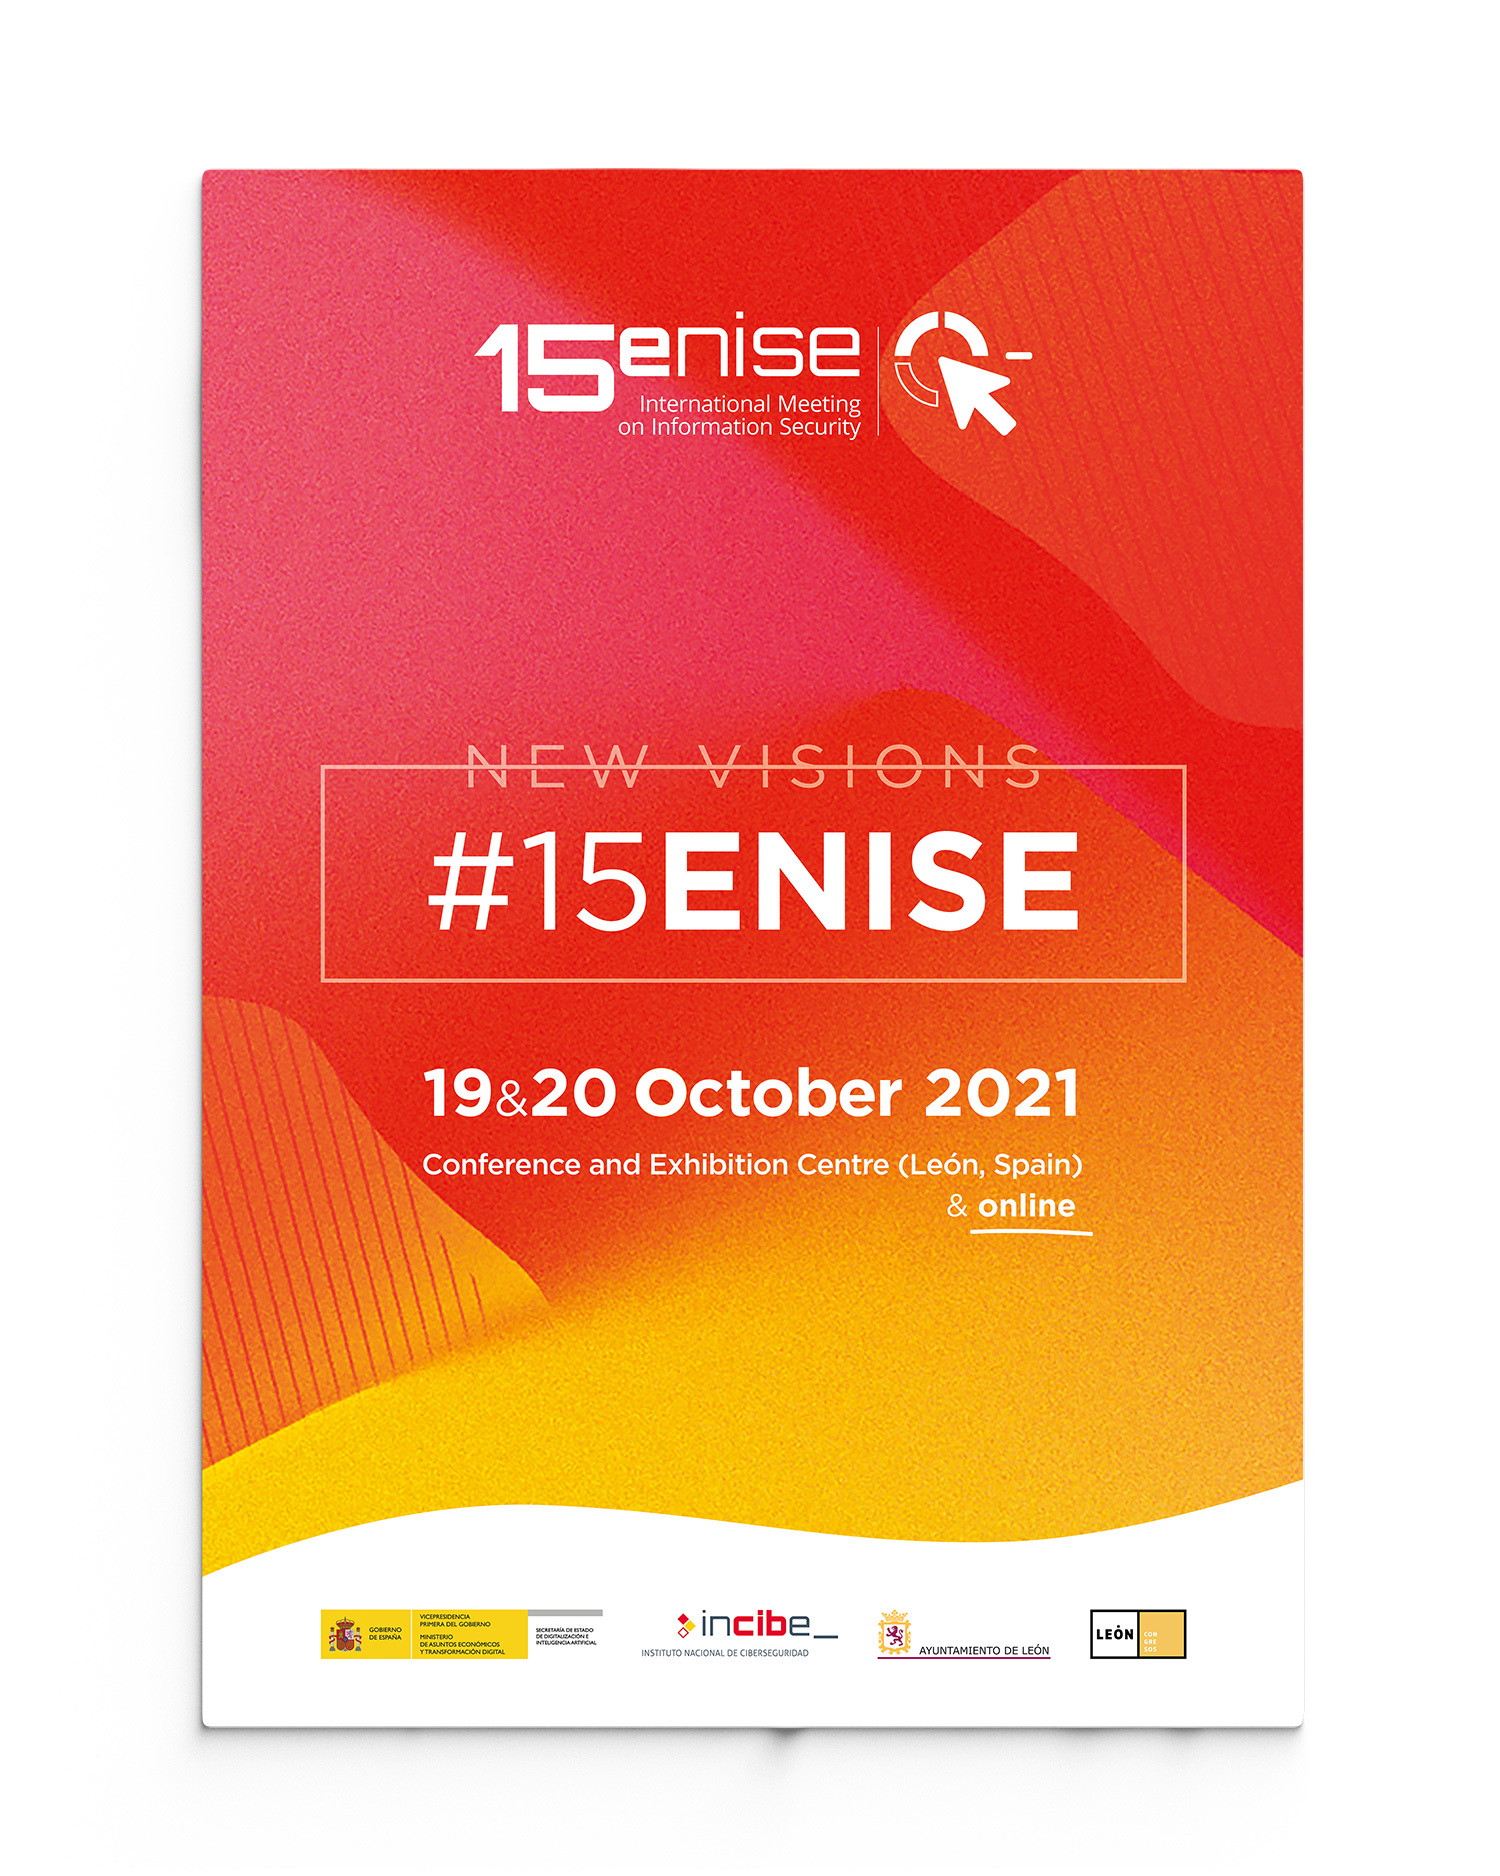 15ENISE - International Meeting on Information Security